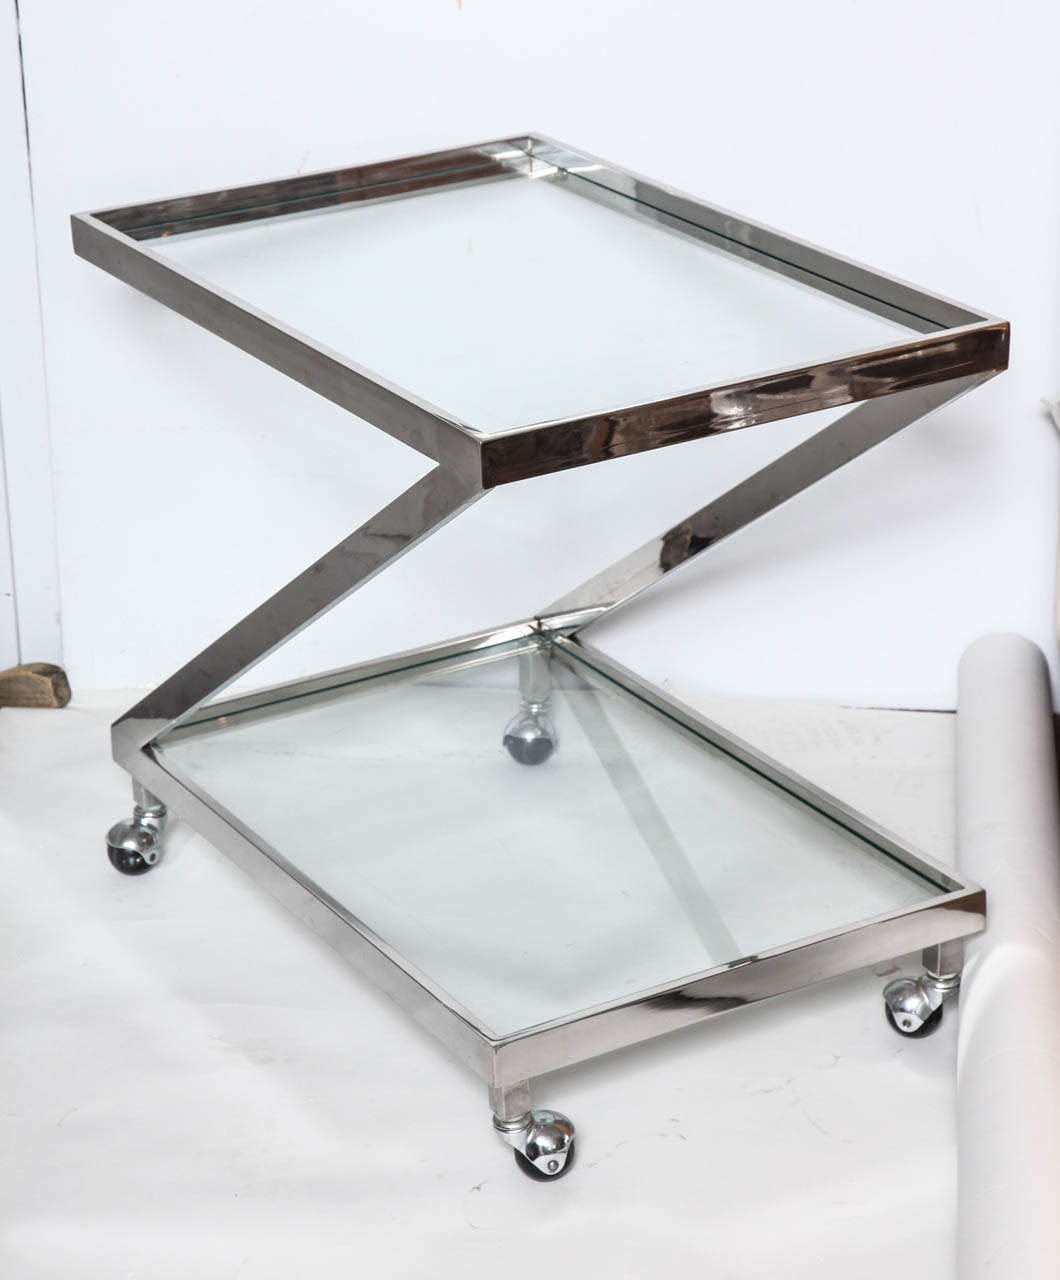 A sleek and practical designer glass and chromed metal stable Z form bar cart on four quality ball wheels